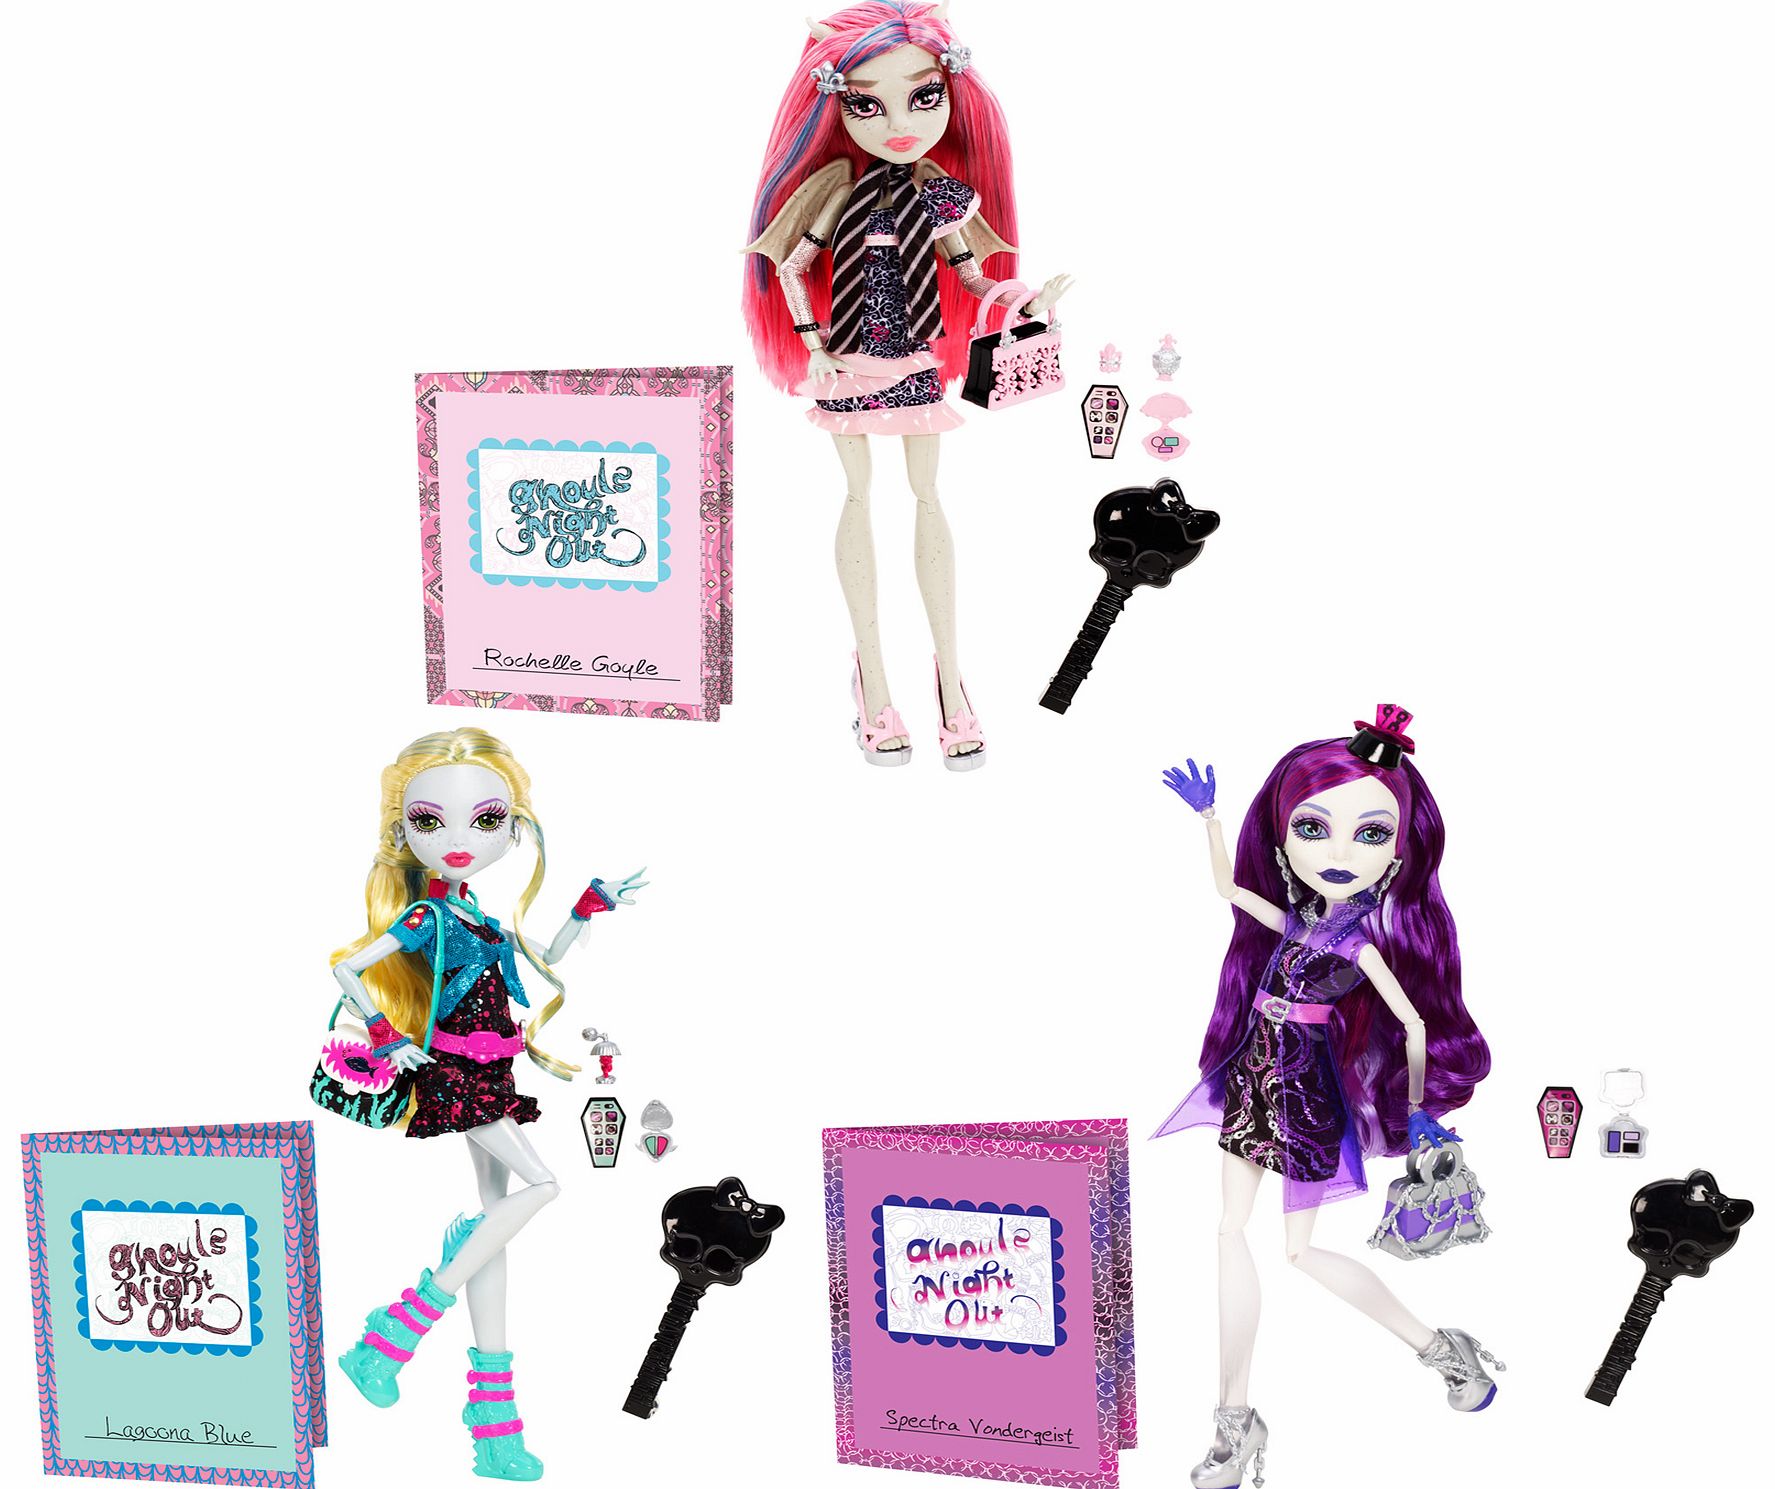 Monster High Ghouls Night Out Doll Assortment